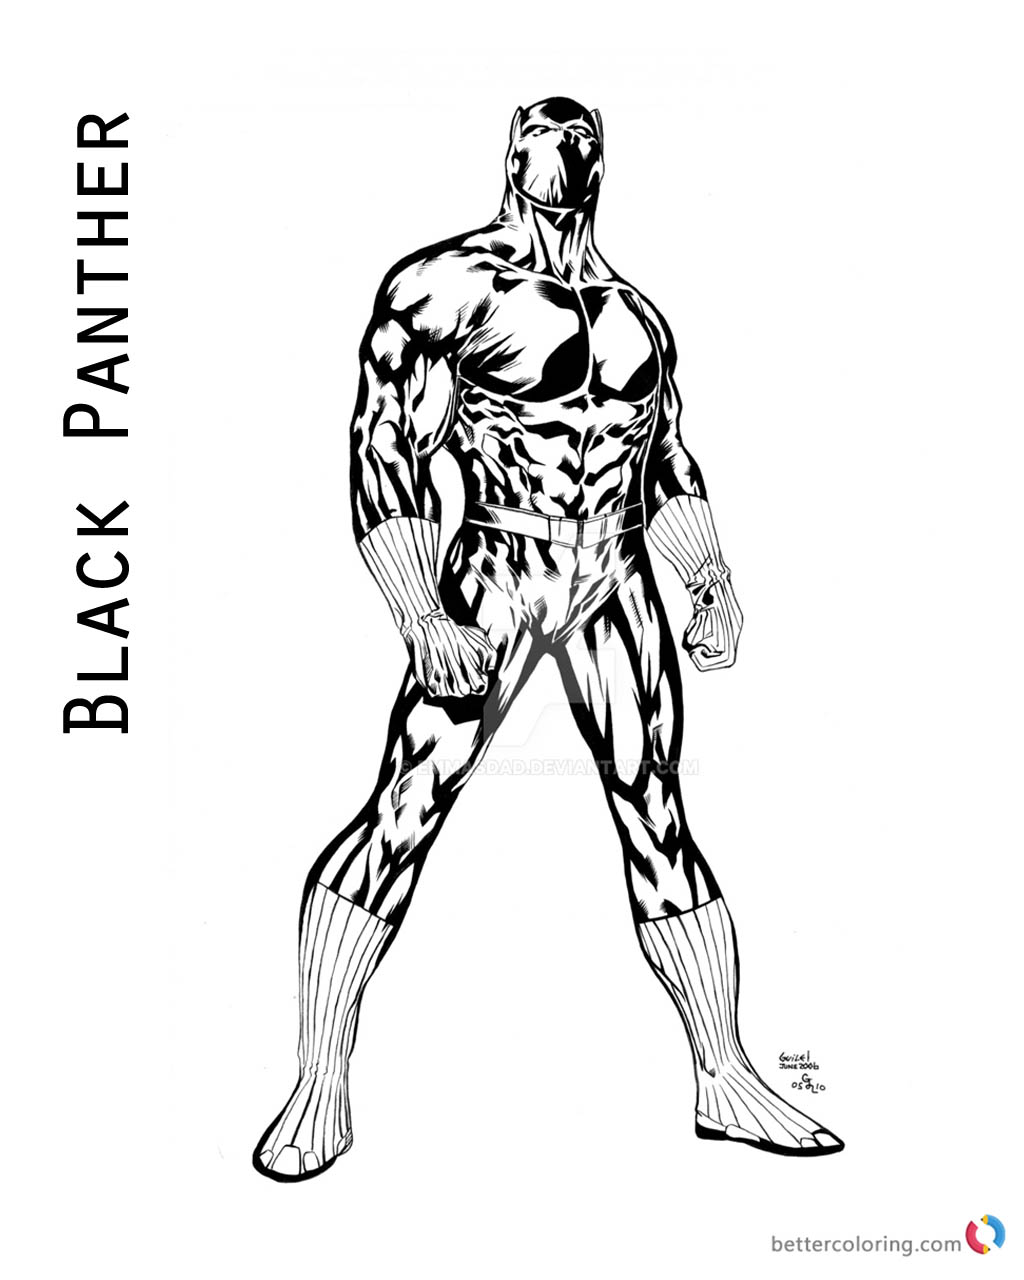 black-panther-coloring-pages-of-marvel-movie-free-printable-coloring